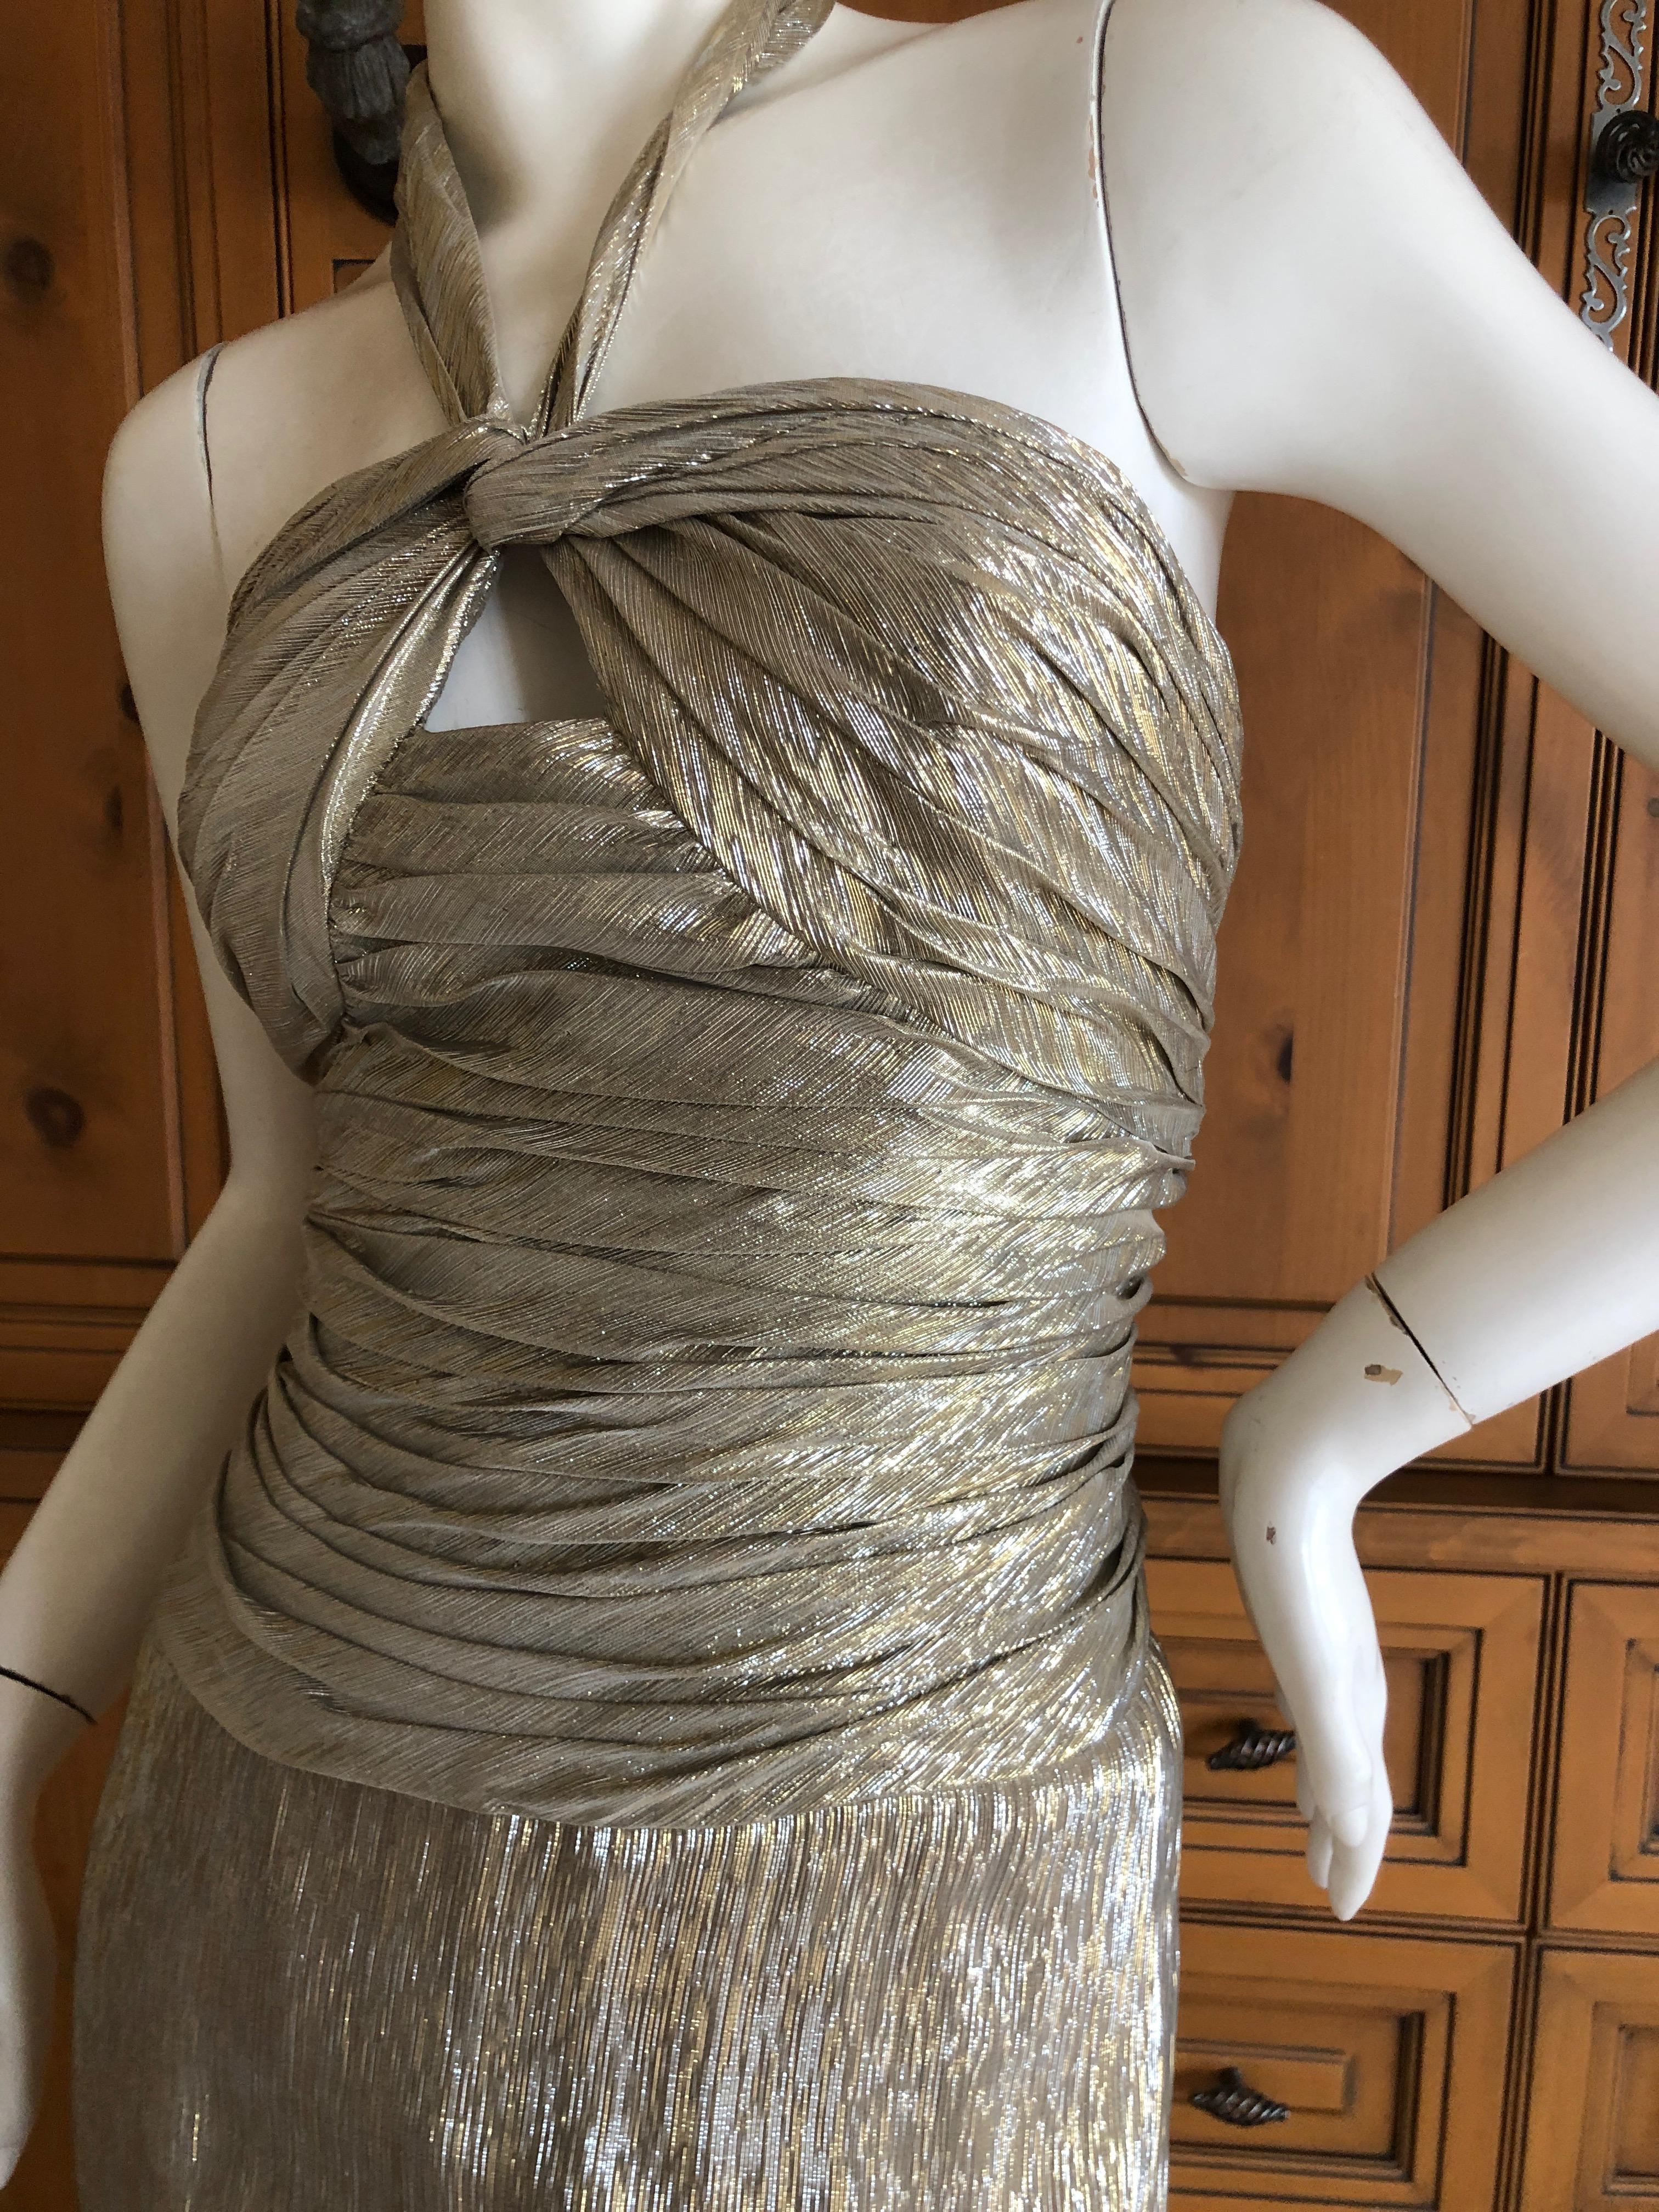 Oscar de la Renta Stunning Metallic Silk Halter Style Evening Dress with Keyhole Detail 
Simply Stunning. Please use the zoom feature to see al the remarkable details.
This shows both gold and silver metallics.
Size 6
 Bust 34